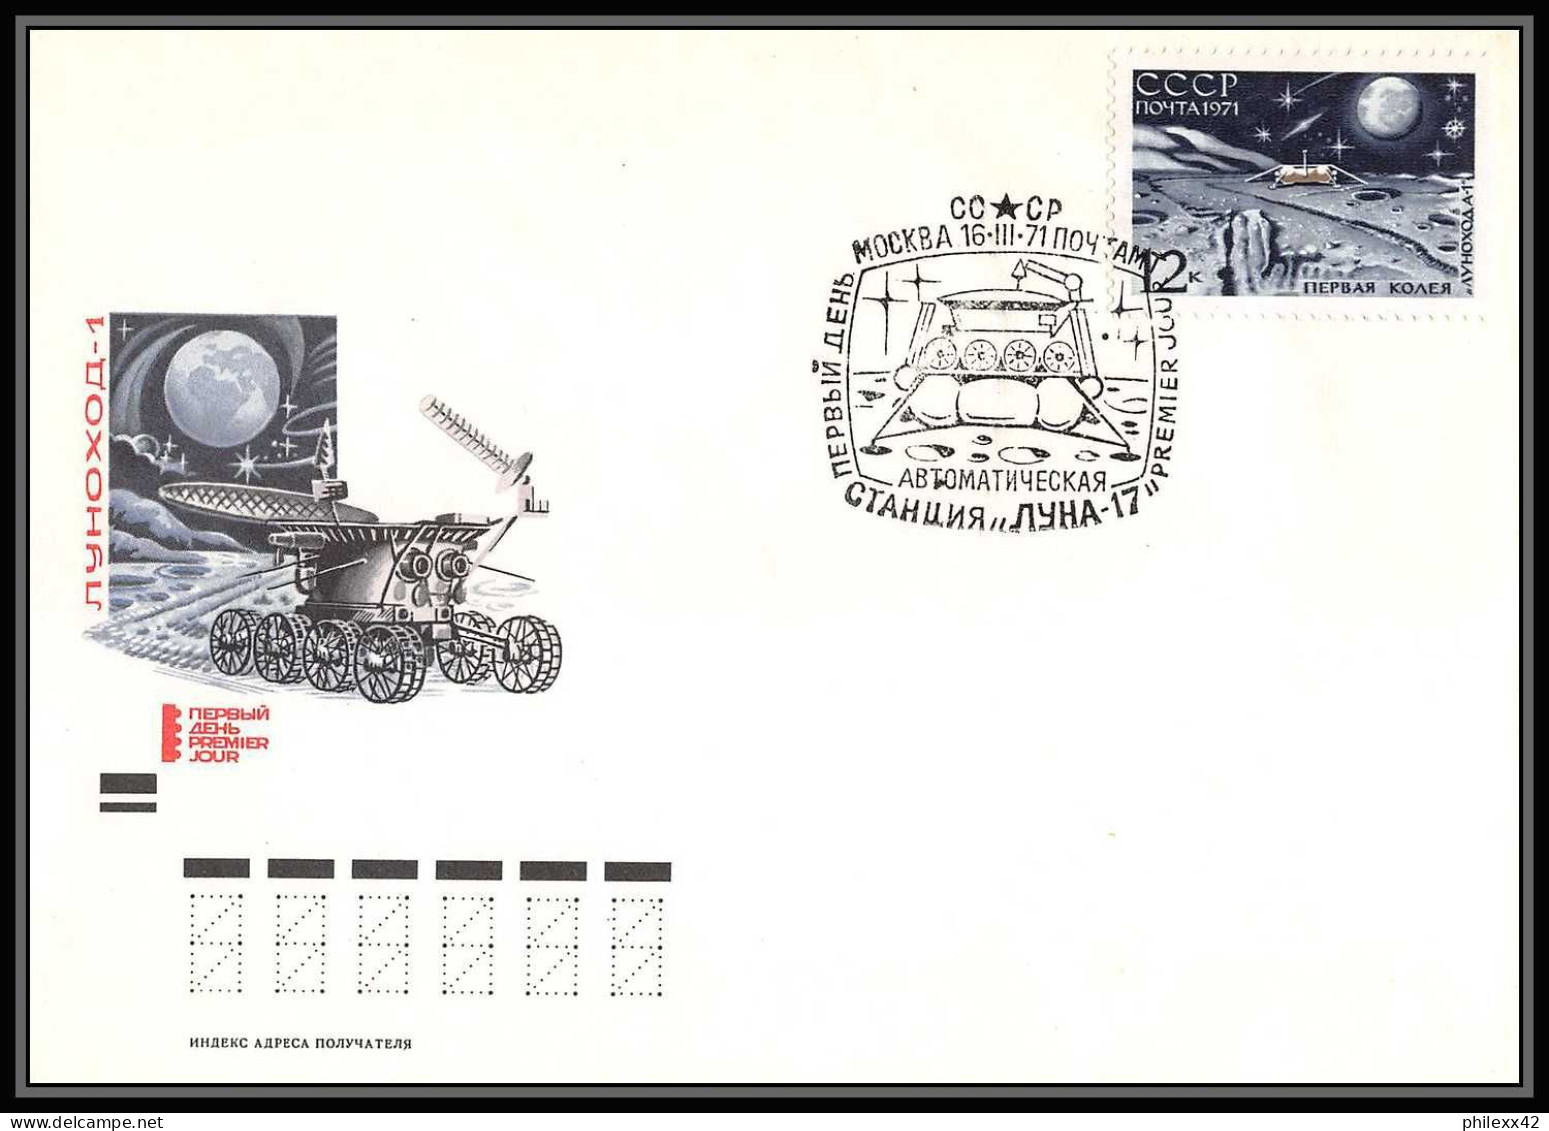 0990 Espace (space Raumfahrt) Lettre (cover briefe) Russie (Russia urss USSR) 16/3/1971 5 lettres fdc 3704/3707 + bloc 